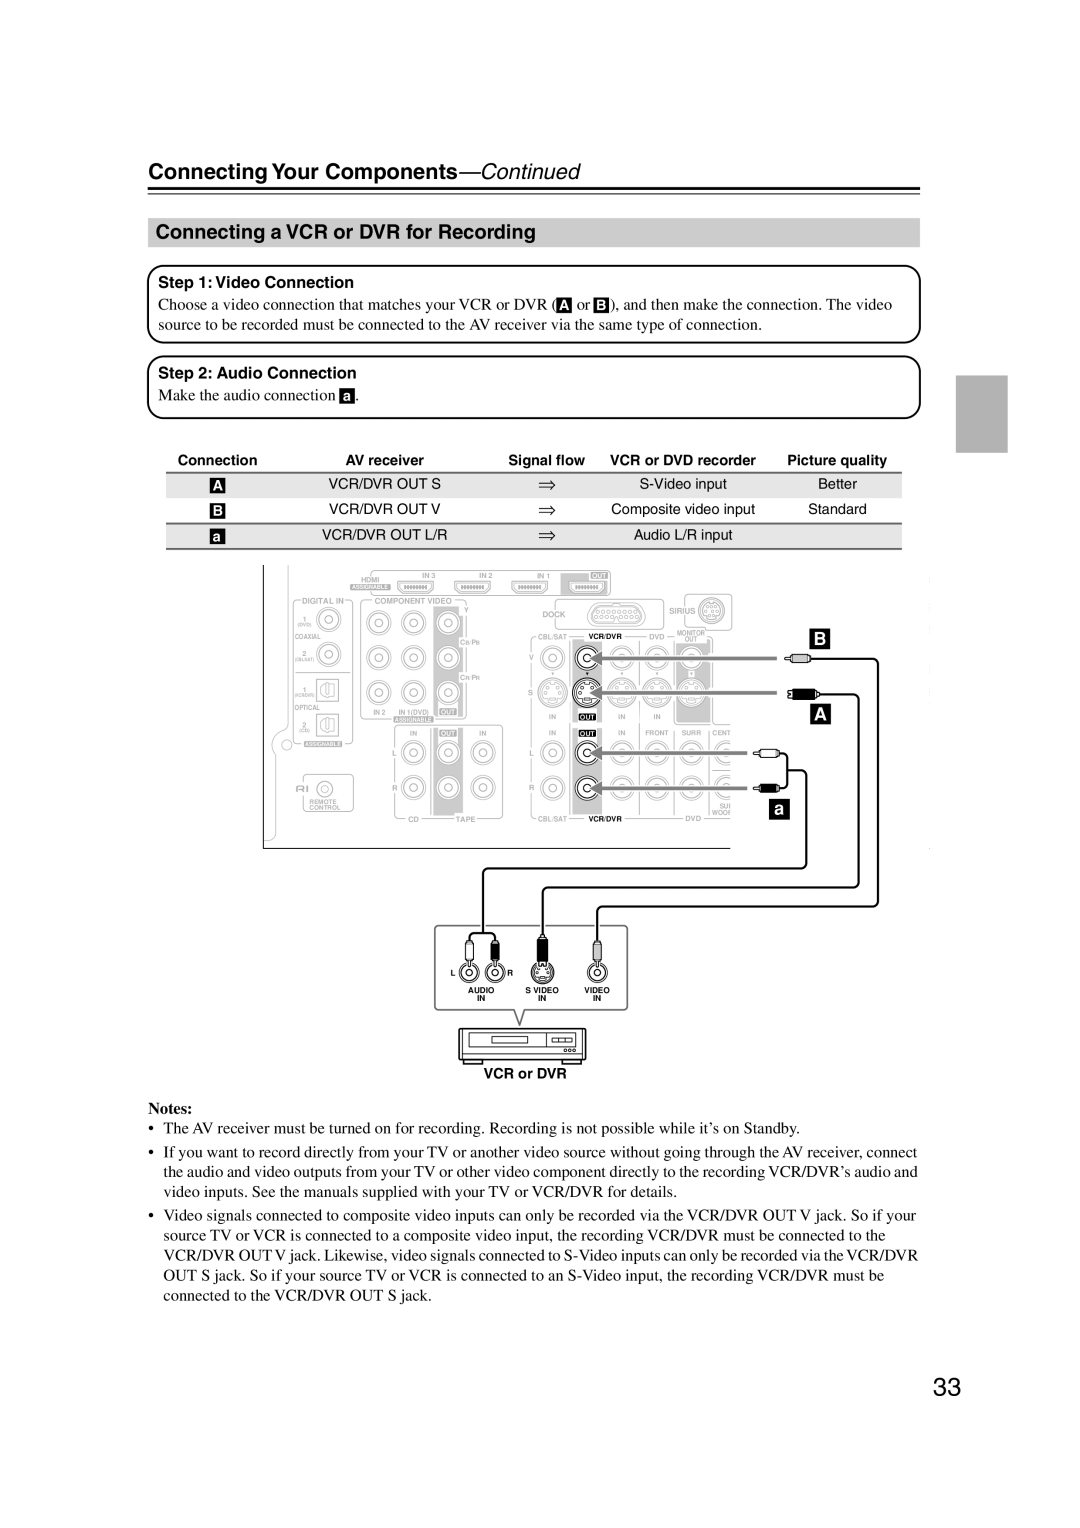 Onkyo HT-S5100 instruction manual Connecting a VCR or DVR for Recording, Connecting Your Components—Continued, Notes 